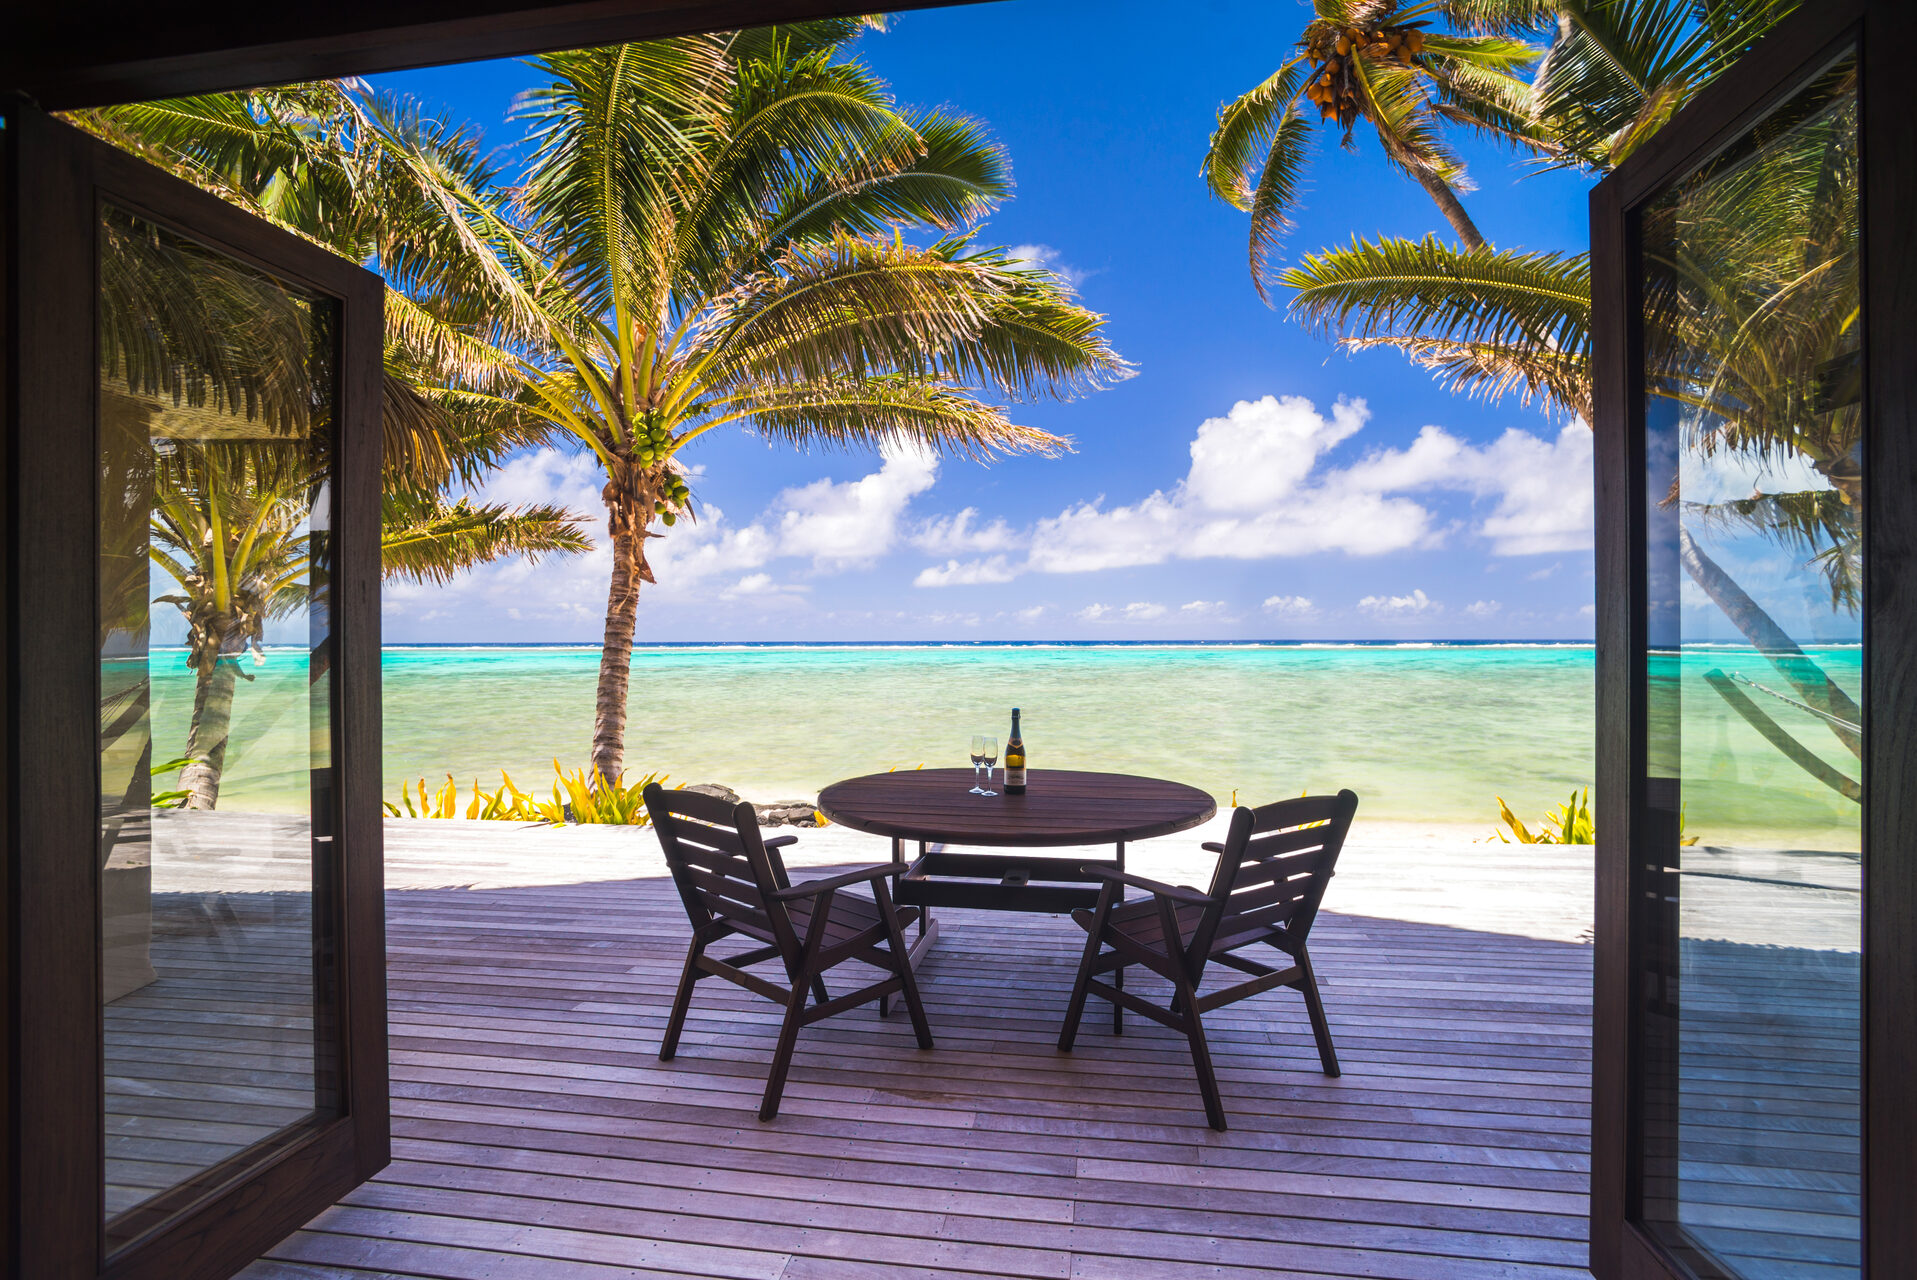 Cook Islands Landscape Travel Photography Luxury beachfront villa accommodation with sea views with champagne on a table next to tropical palm trees and the beautiful blue Pacific Ocean